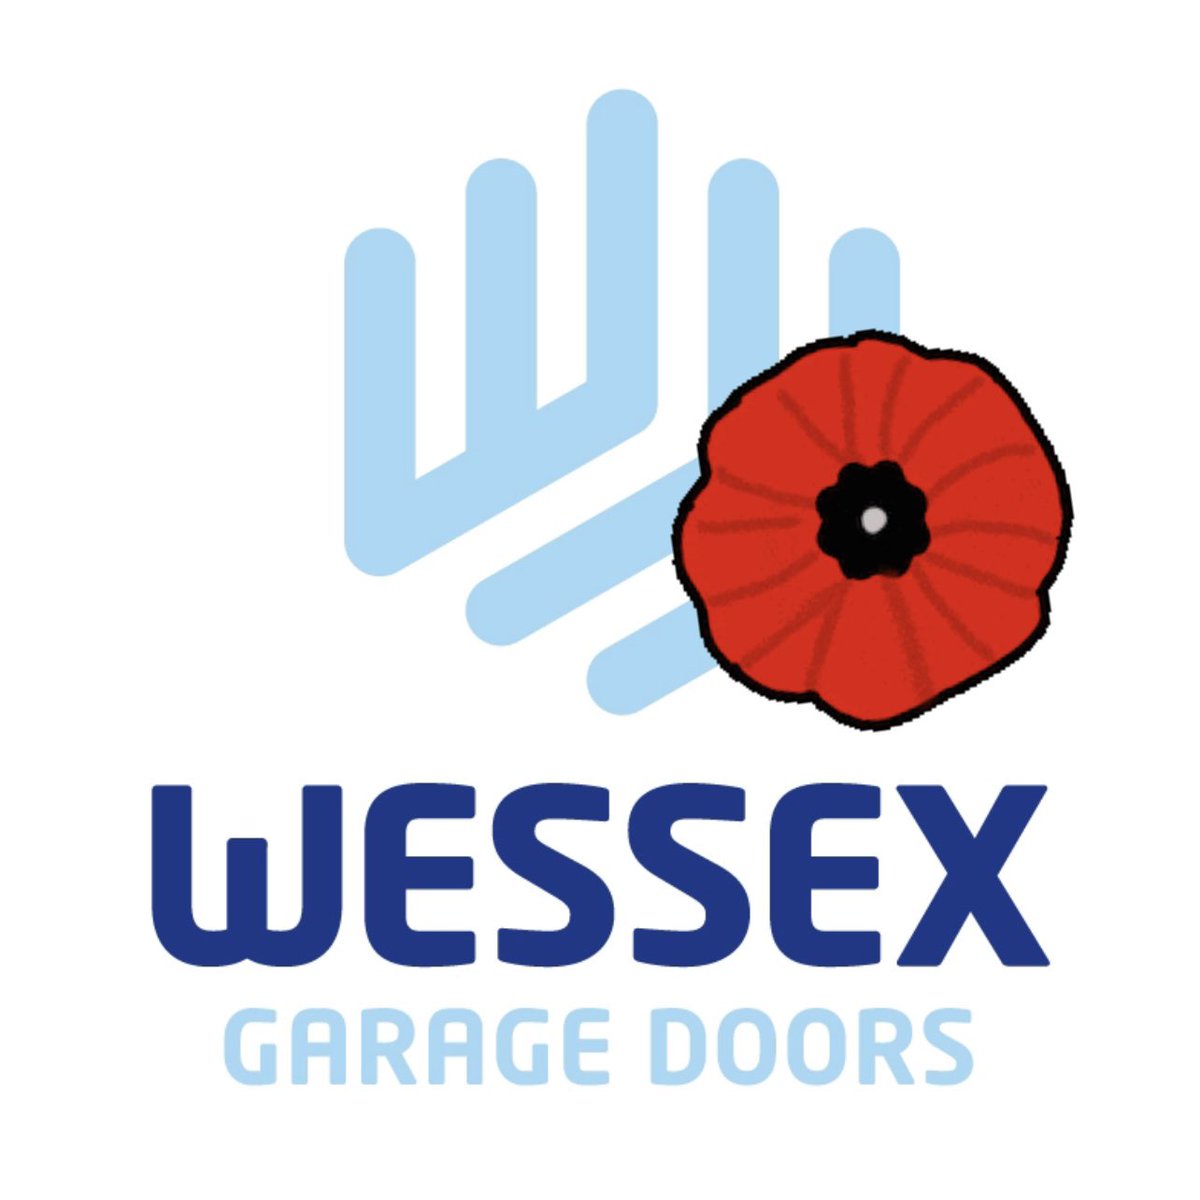 Armistice Day and Remembrance Sunday

Let us remember the service and sacrifice of all those that have defended our freedoms and protect us to this day. 

#wessexgaragedoors #rememberancesunday #lestweneverforget #ArmisticeDay2023